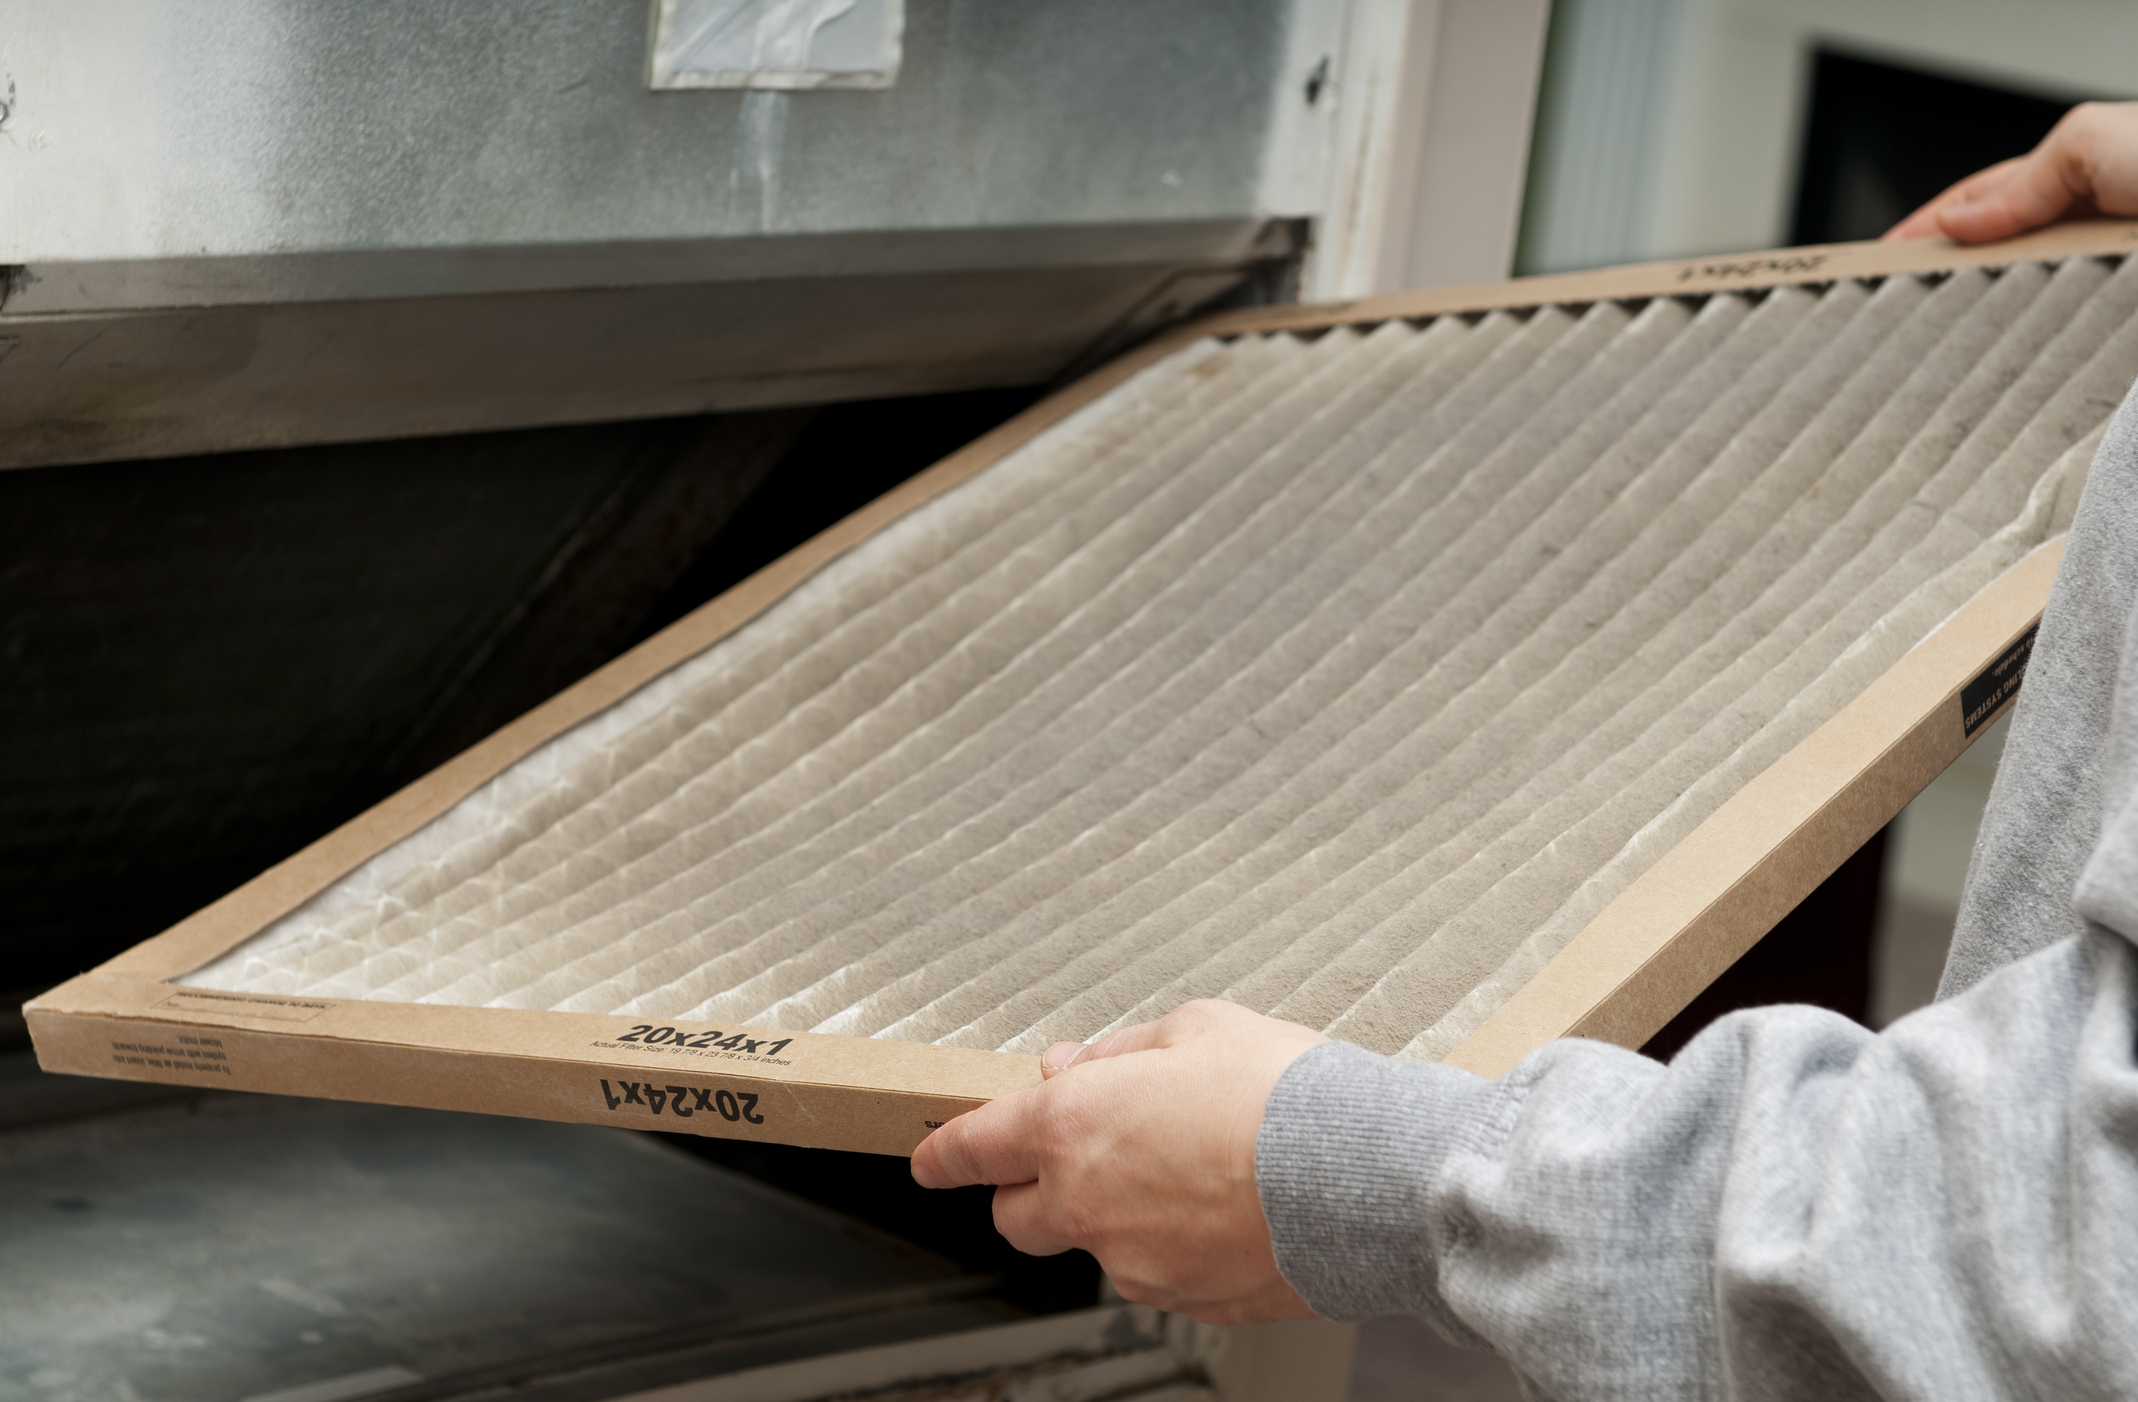 Air Filter Decisions: Should You Choose Disposable or Permanent?